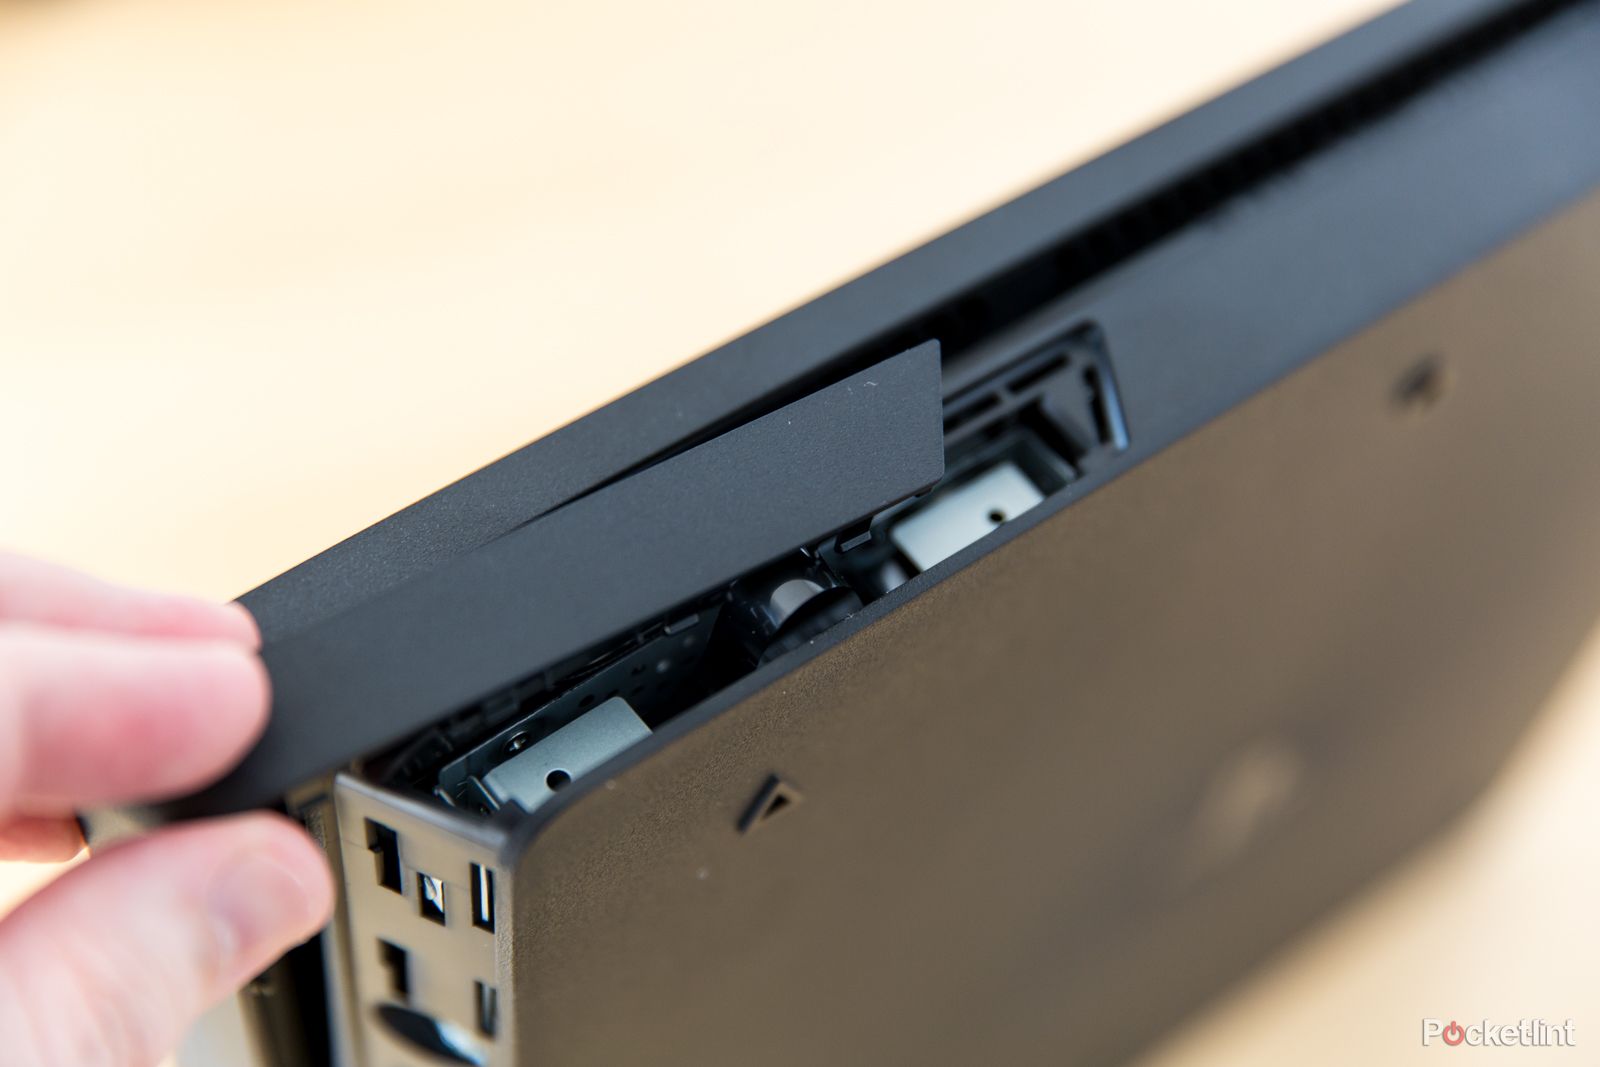 How To Upgrade Your Ps4 Hard Drive To 4tb Or More image 1